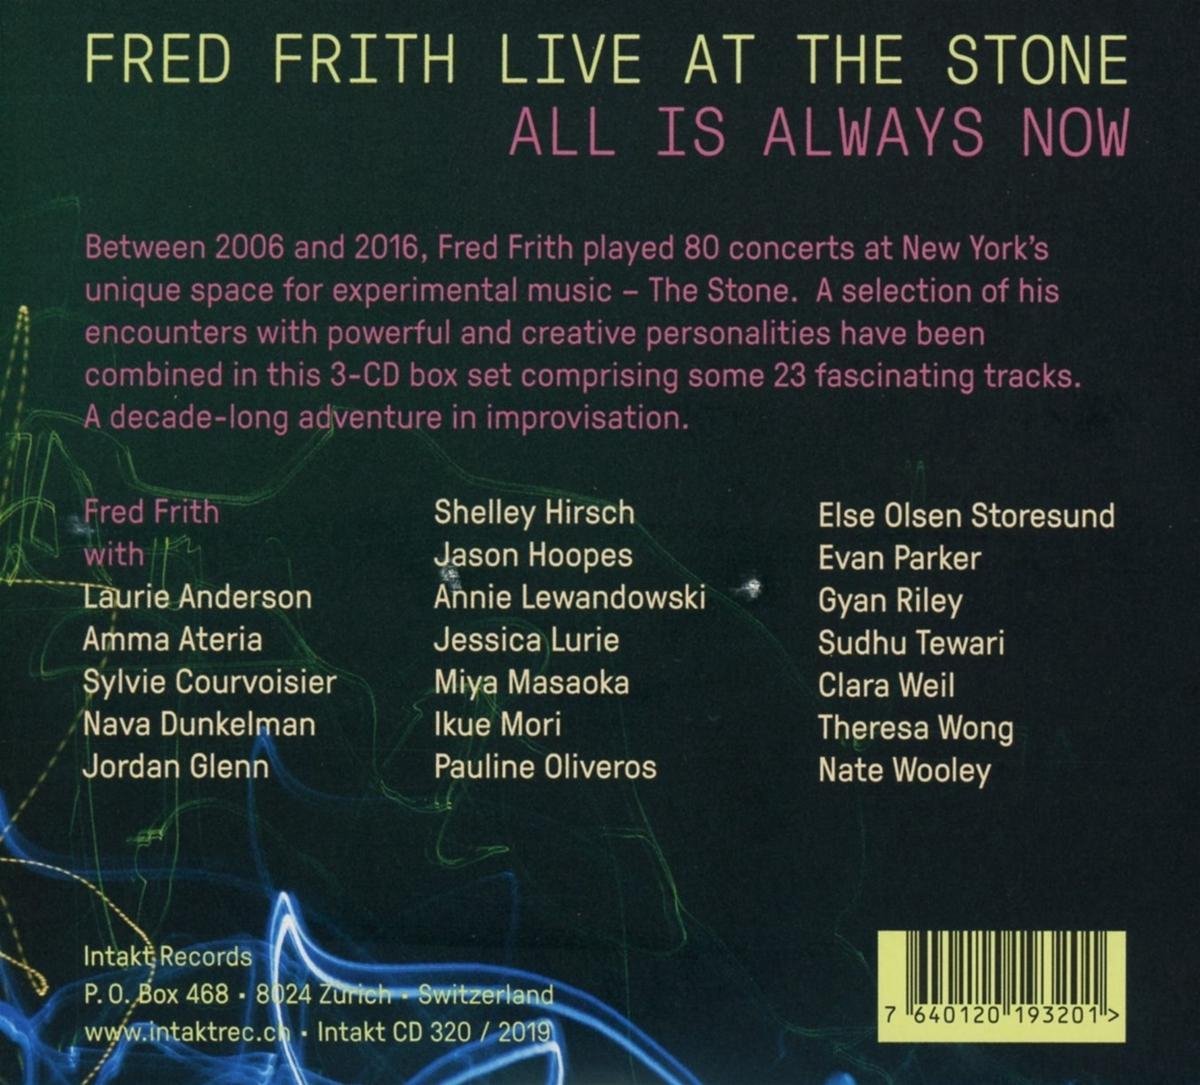 Fred Frith Live at The Stone - slide-1